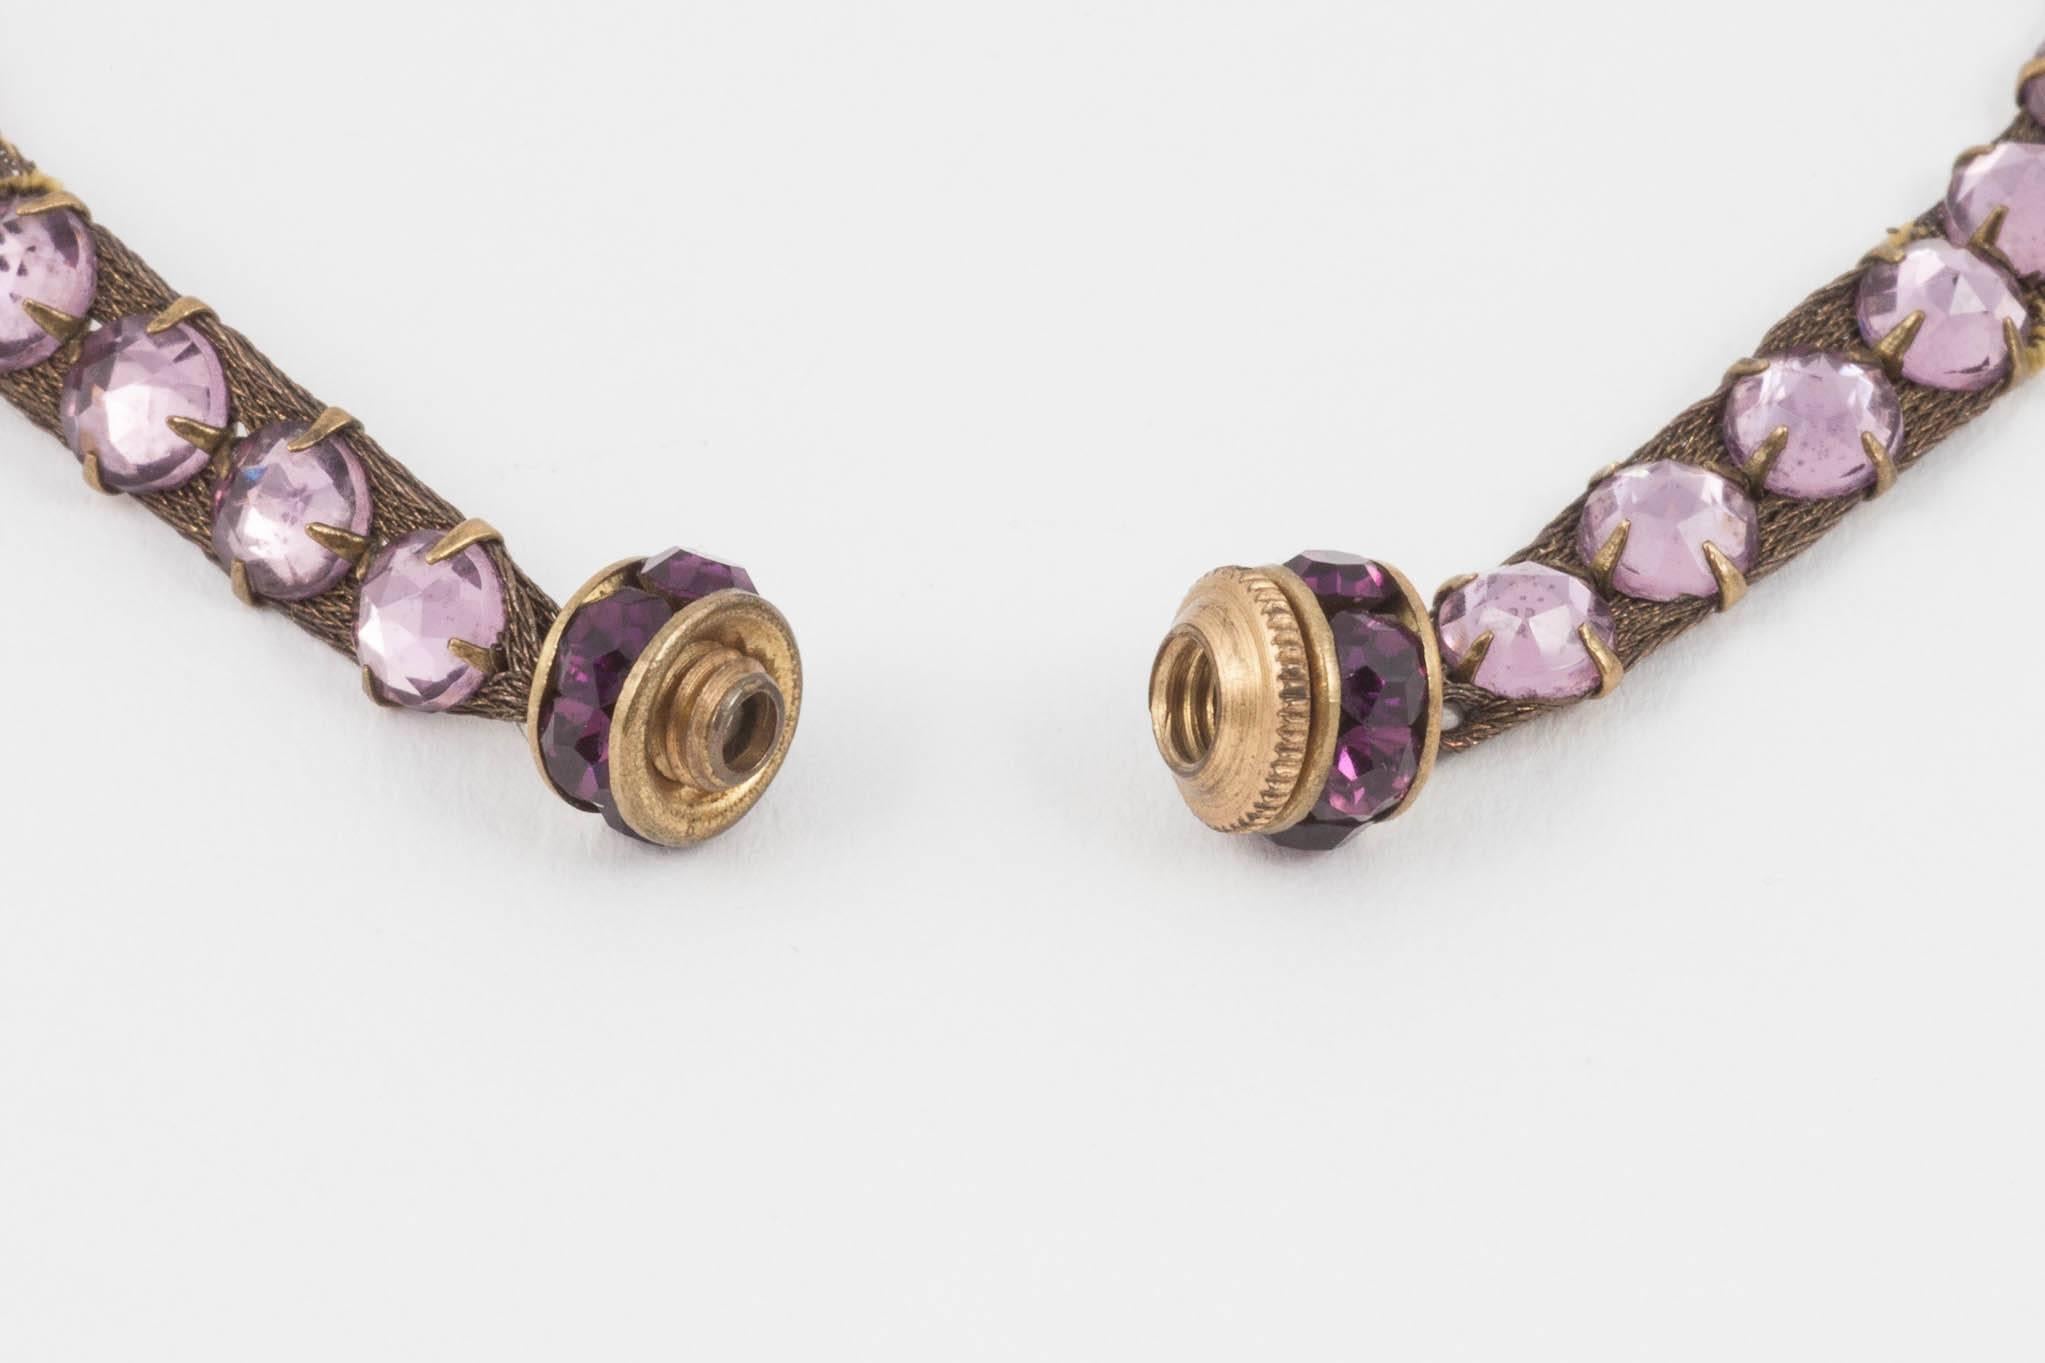 Amethyst glass faceted cabuchon collar and matching earrings, att. Lanvin, 1920s For Sale 2